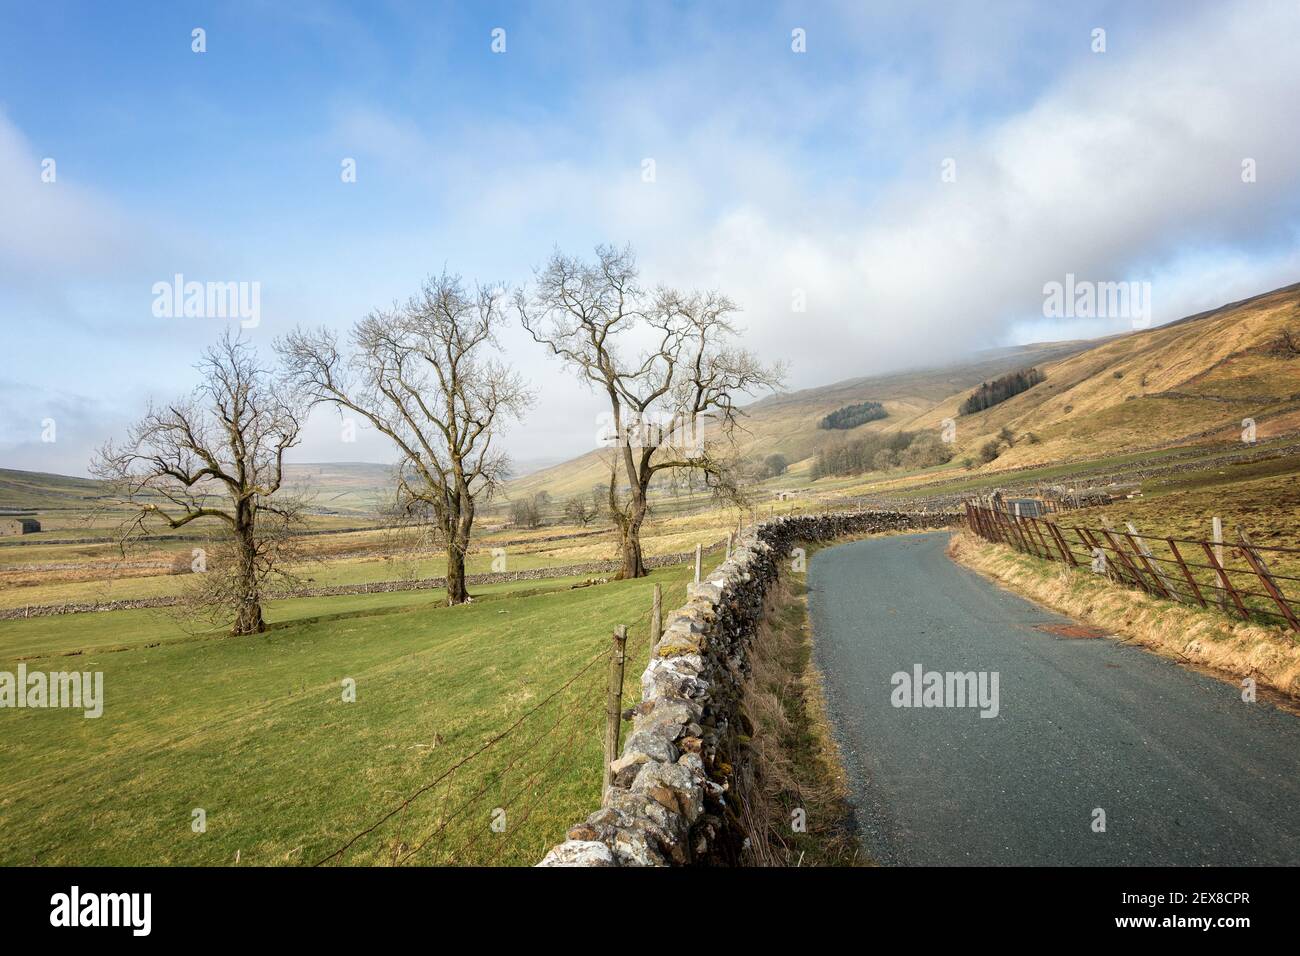 UK Landscape: Three old trees next to the road approaching Halton Gill in Littondale on an early spring day, Yorkshire Dales National Park, UK Stock Photo